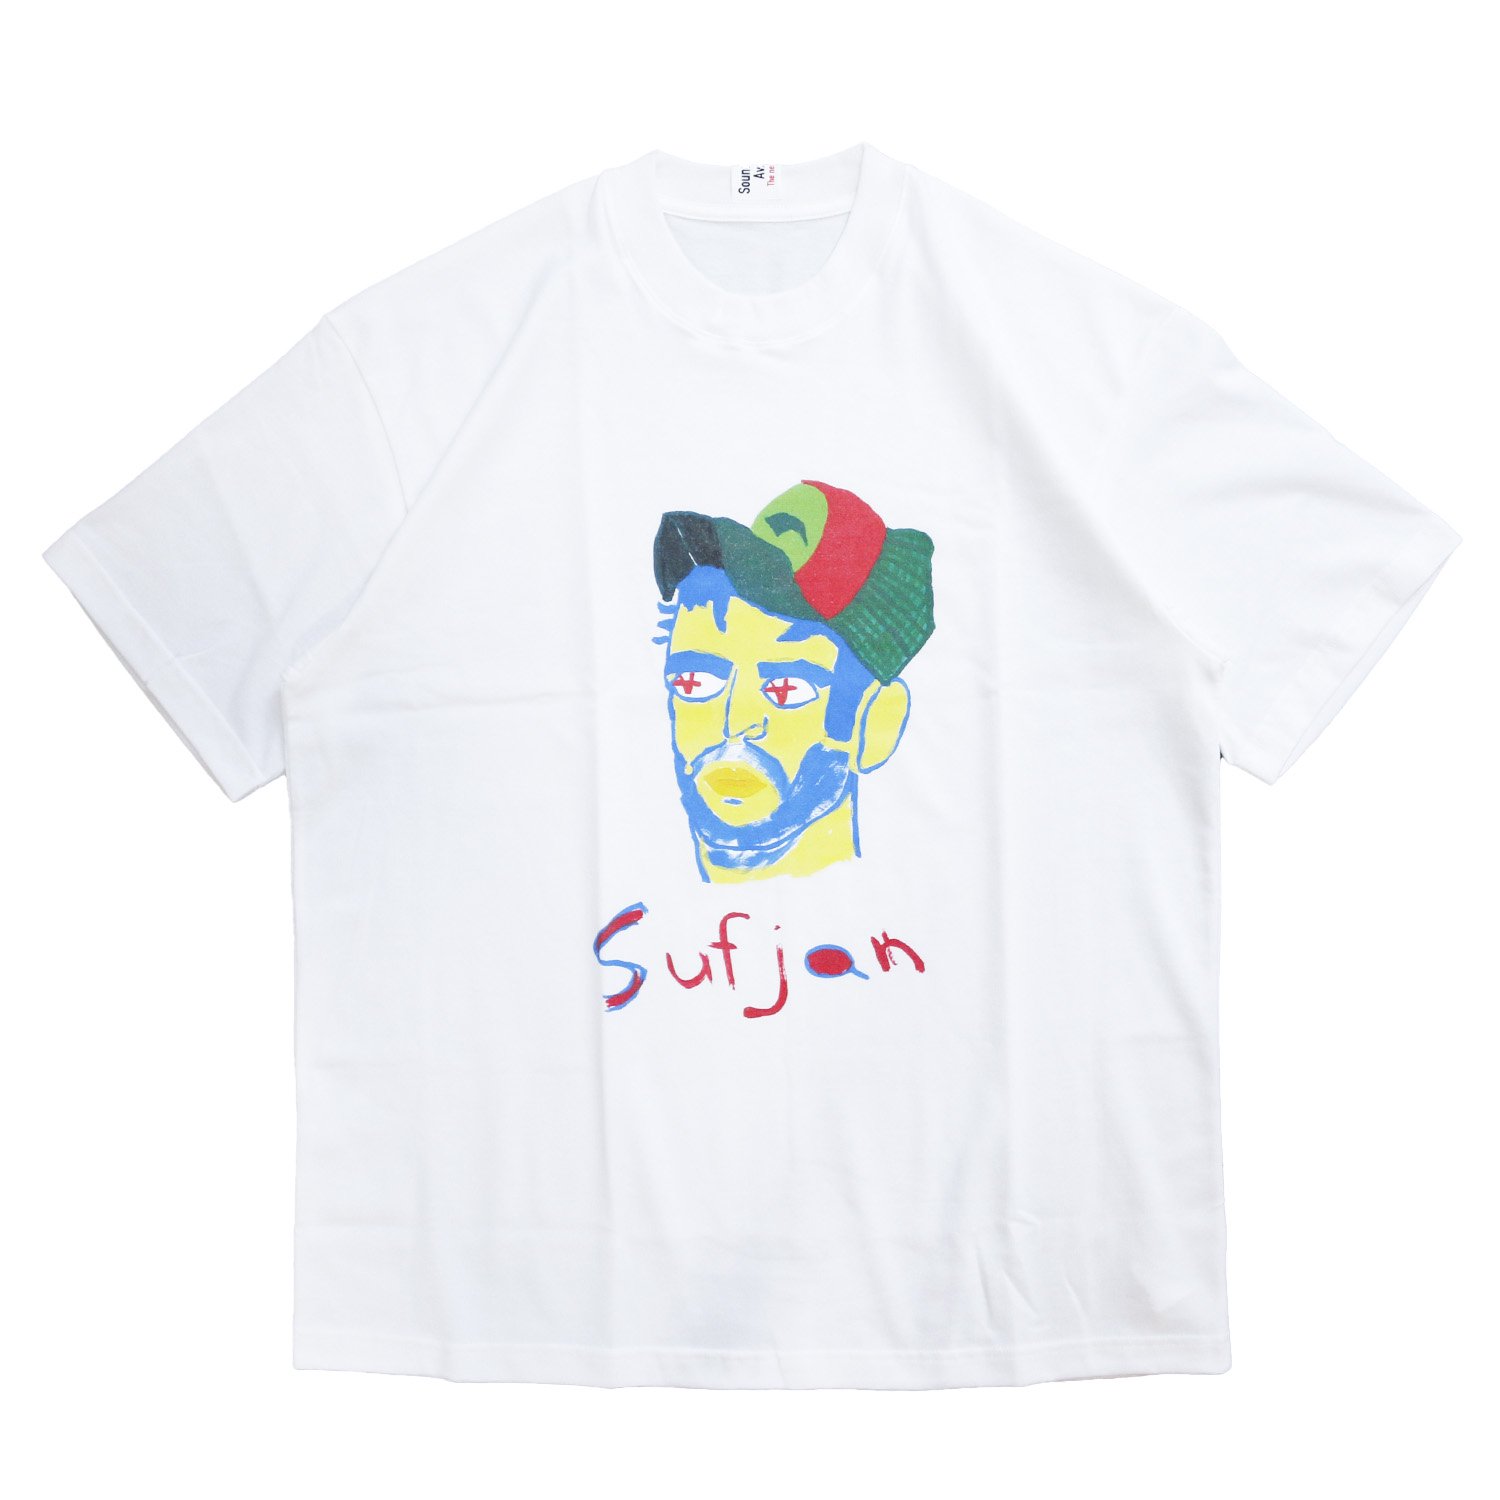 <img class='new_mark_img1' src='https://img.shop-pro.jp/img/new/icons8.gif' style='border:none;display:inline;margin:0px;padding:0px;width:auto;' />SOUNDS AWESOME / SUFJAN T-shirt